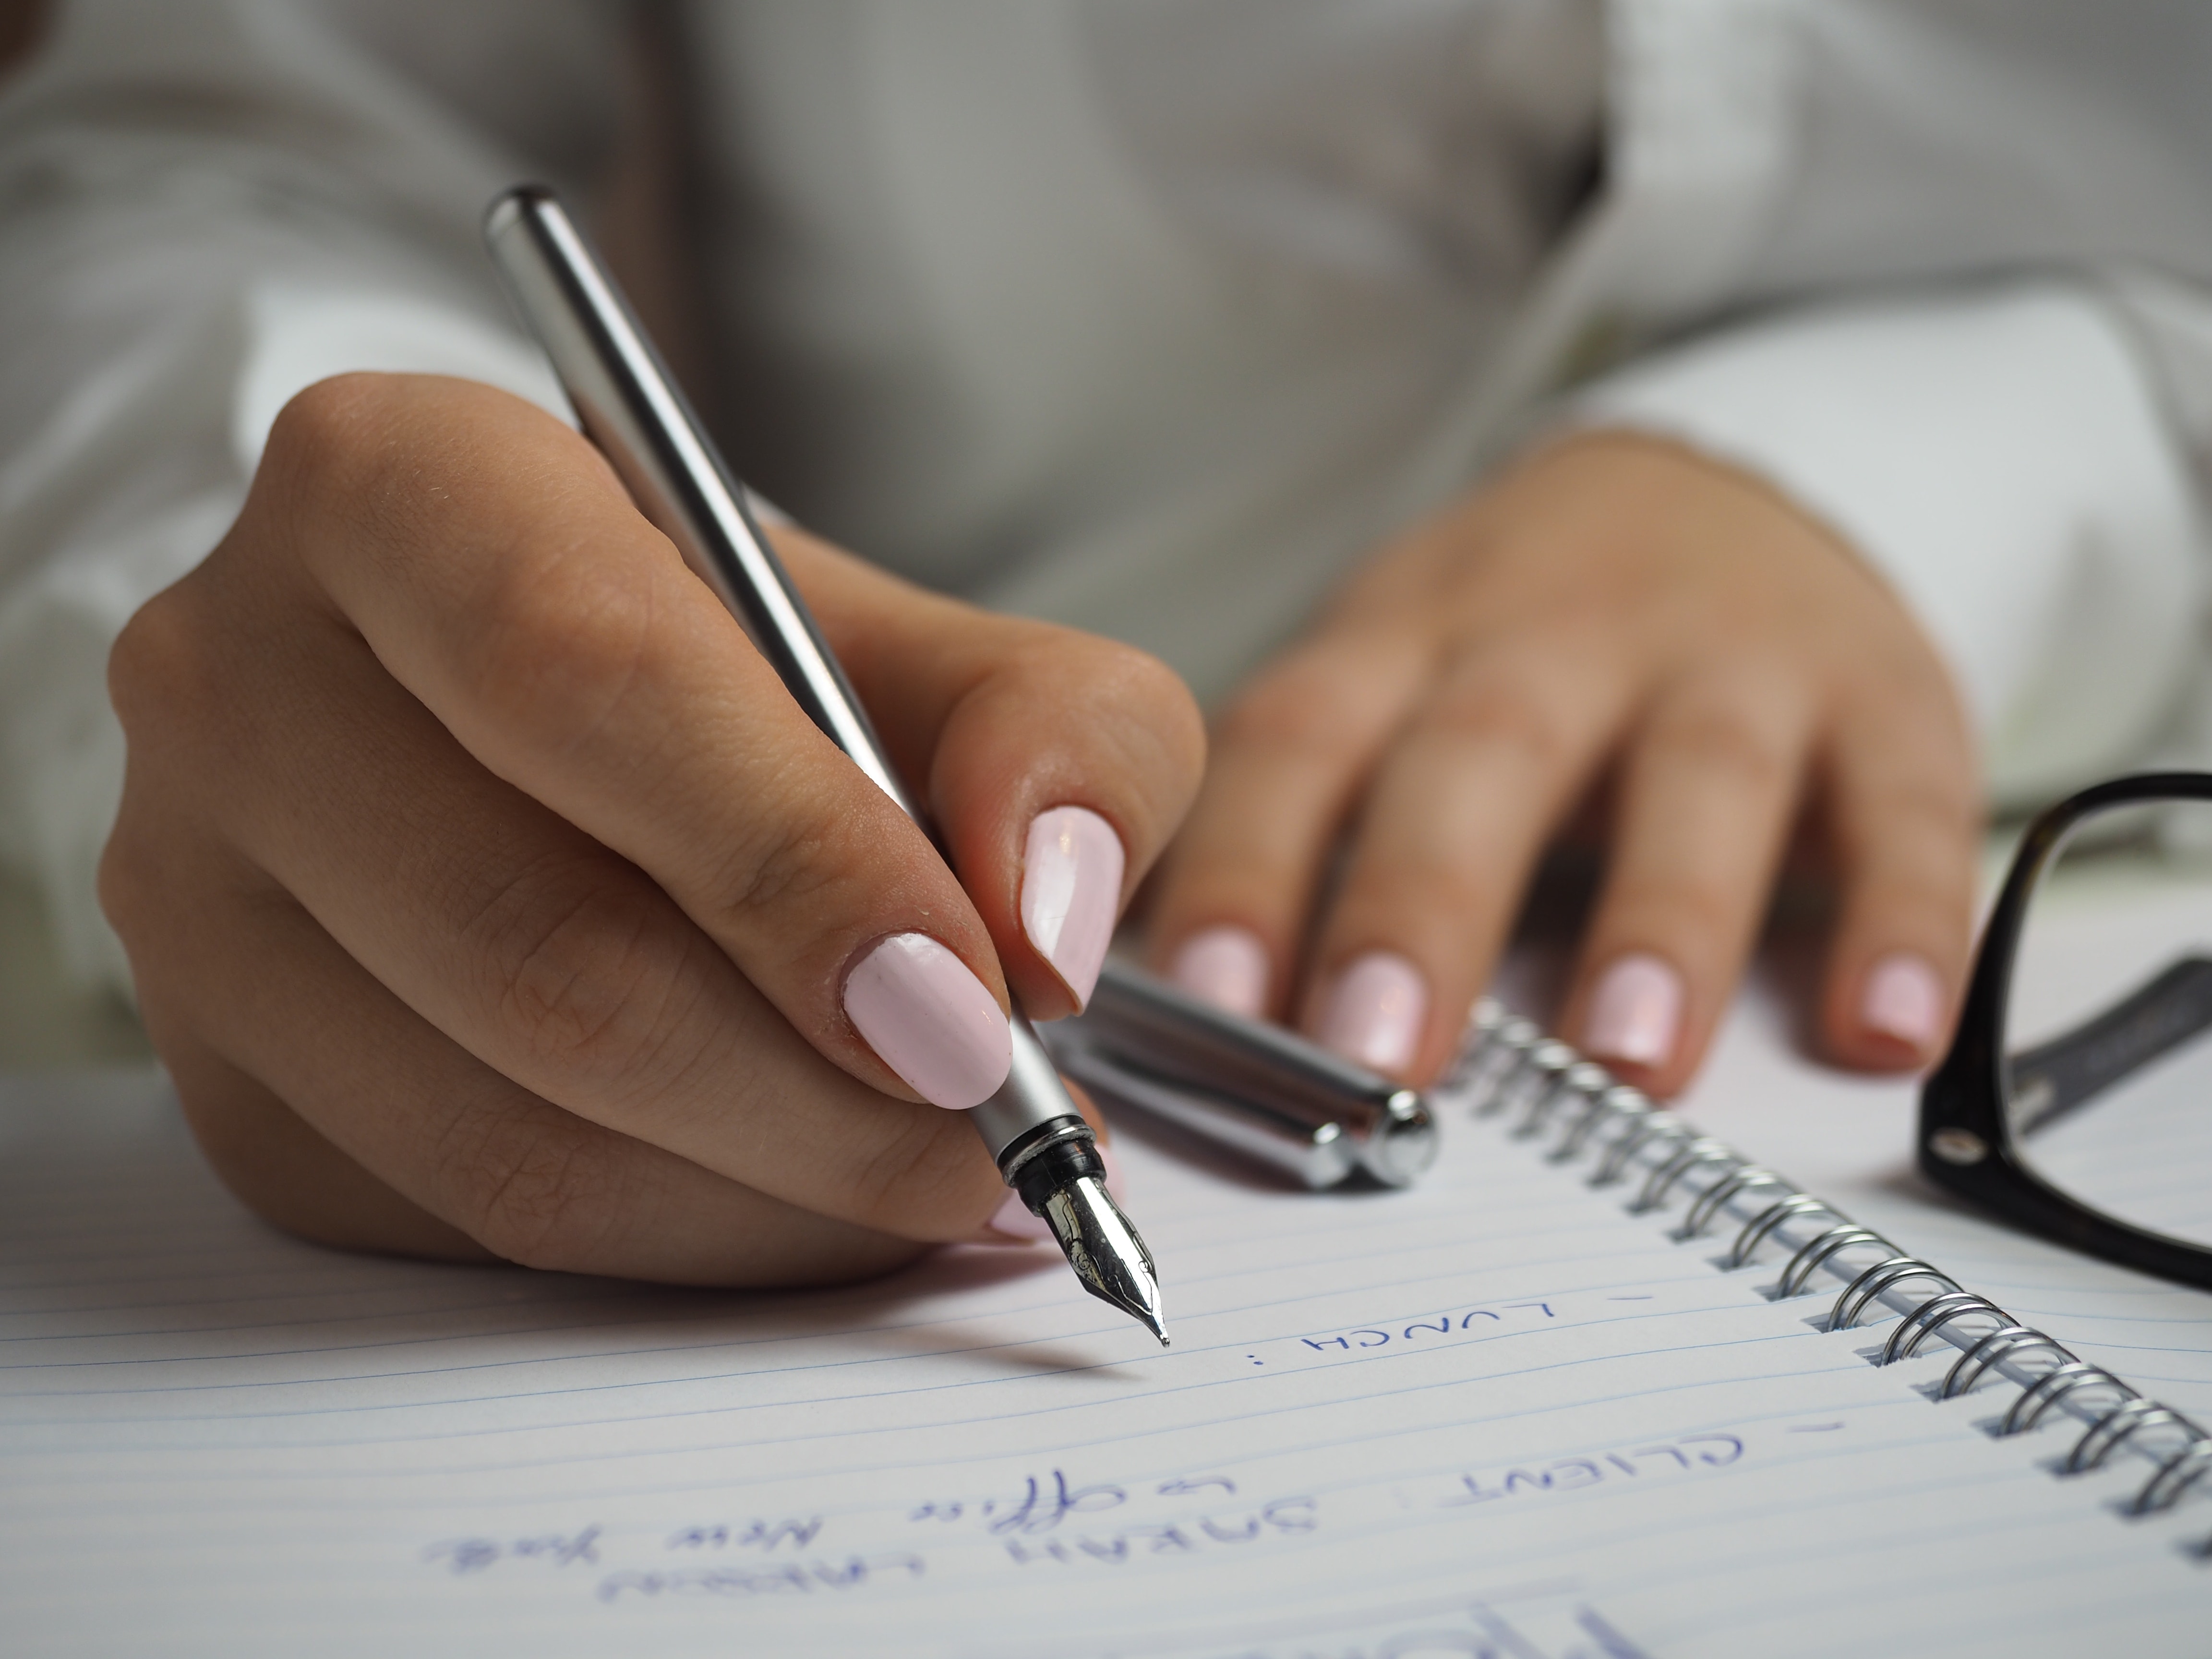 Woman in White Long Sleeved Shirt Holding a Pen Writing on a Paper · Free